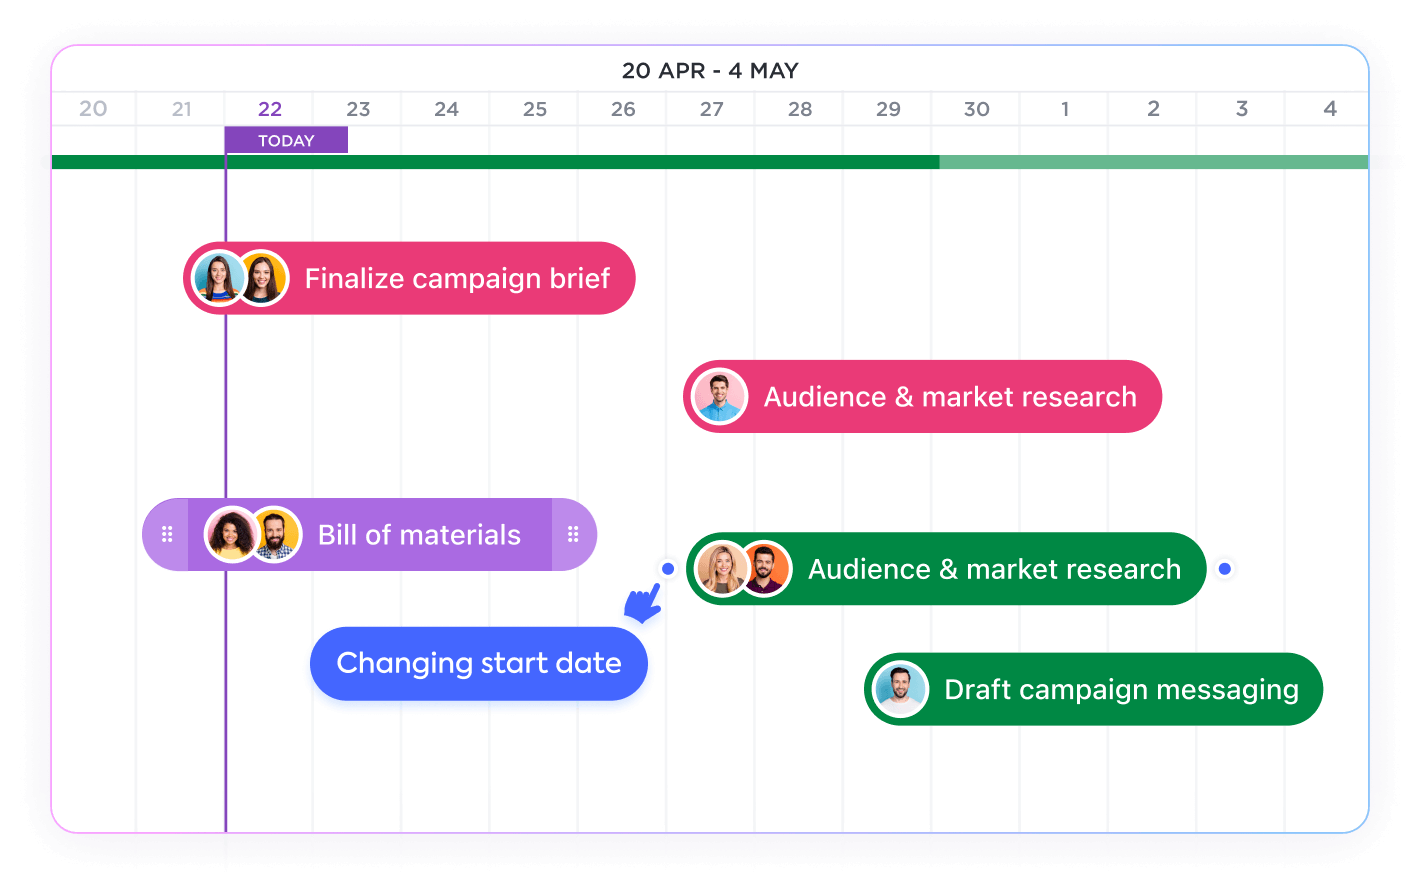 Gantt chart in Clickup displaying tasks for a marketing campaign, including finalizing the campaign brief, audience research, and drafting messaging.